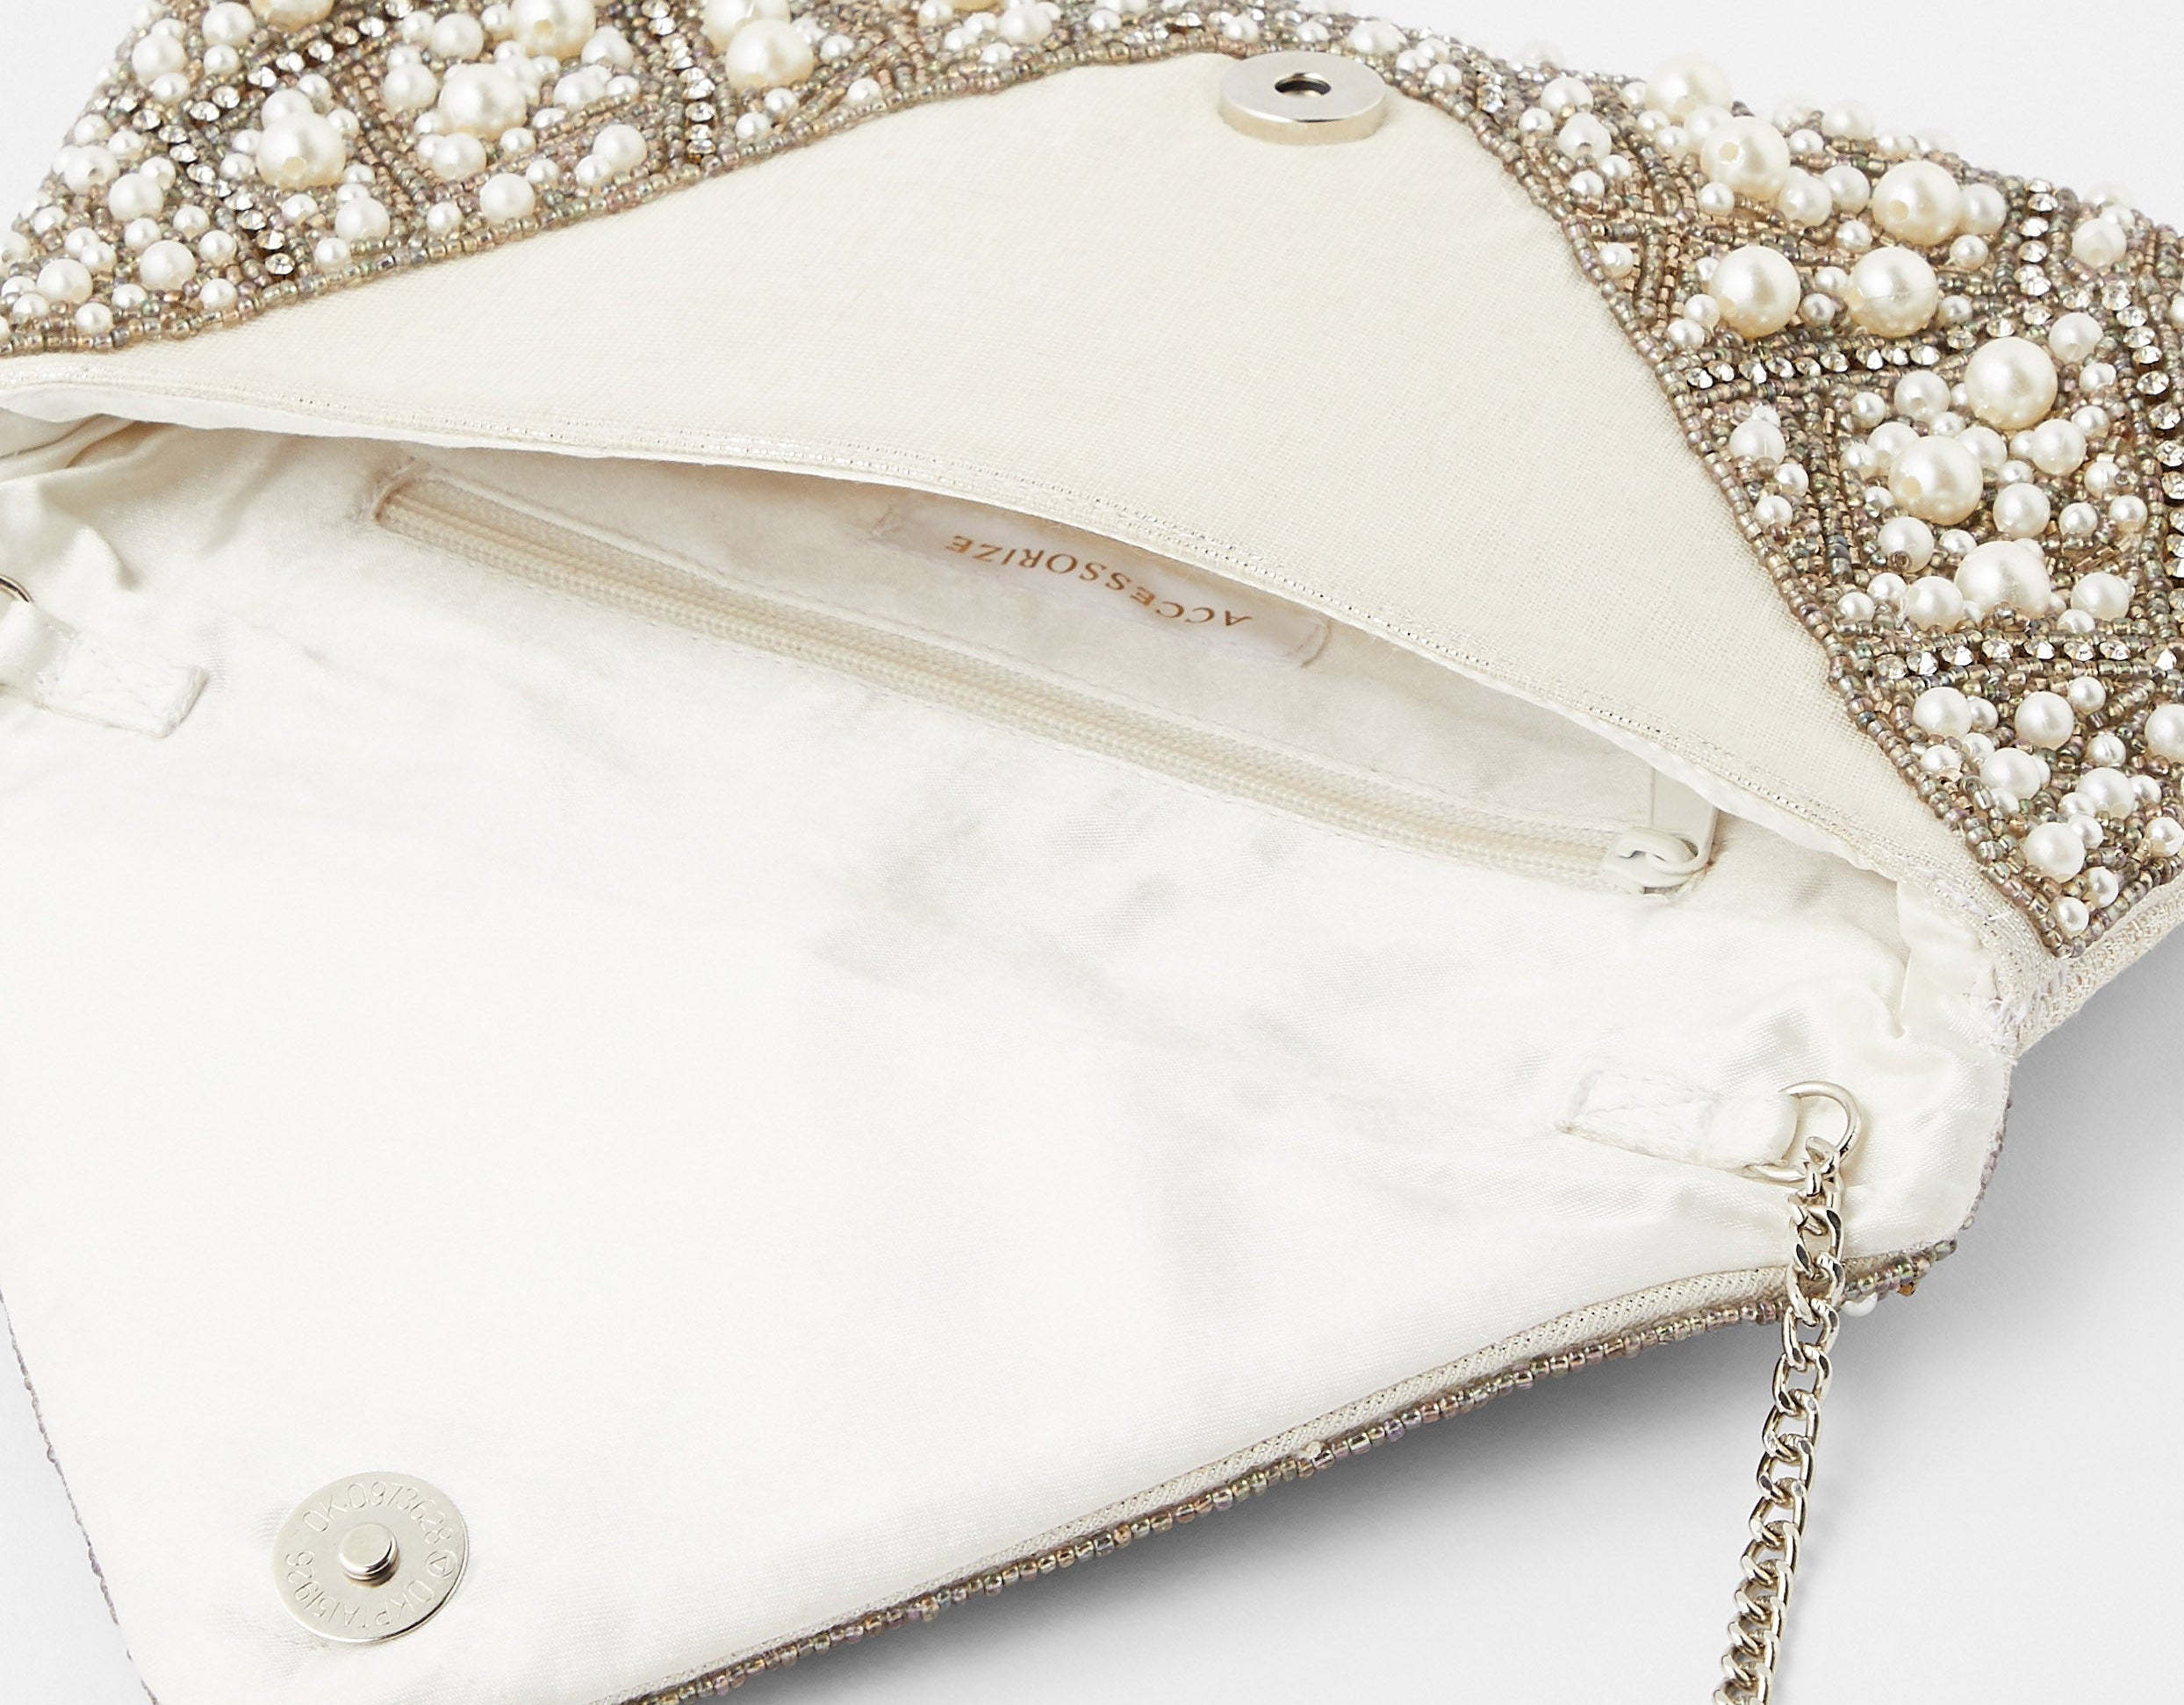 Accessorize London Women's Faux Leather Pearl Encrusted Embellished Envelope